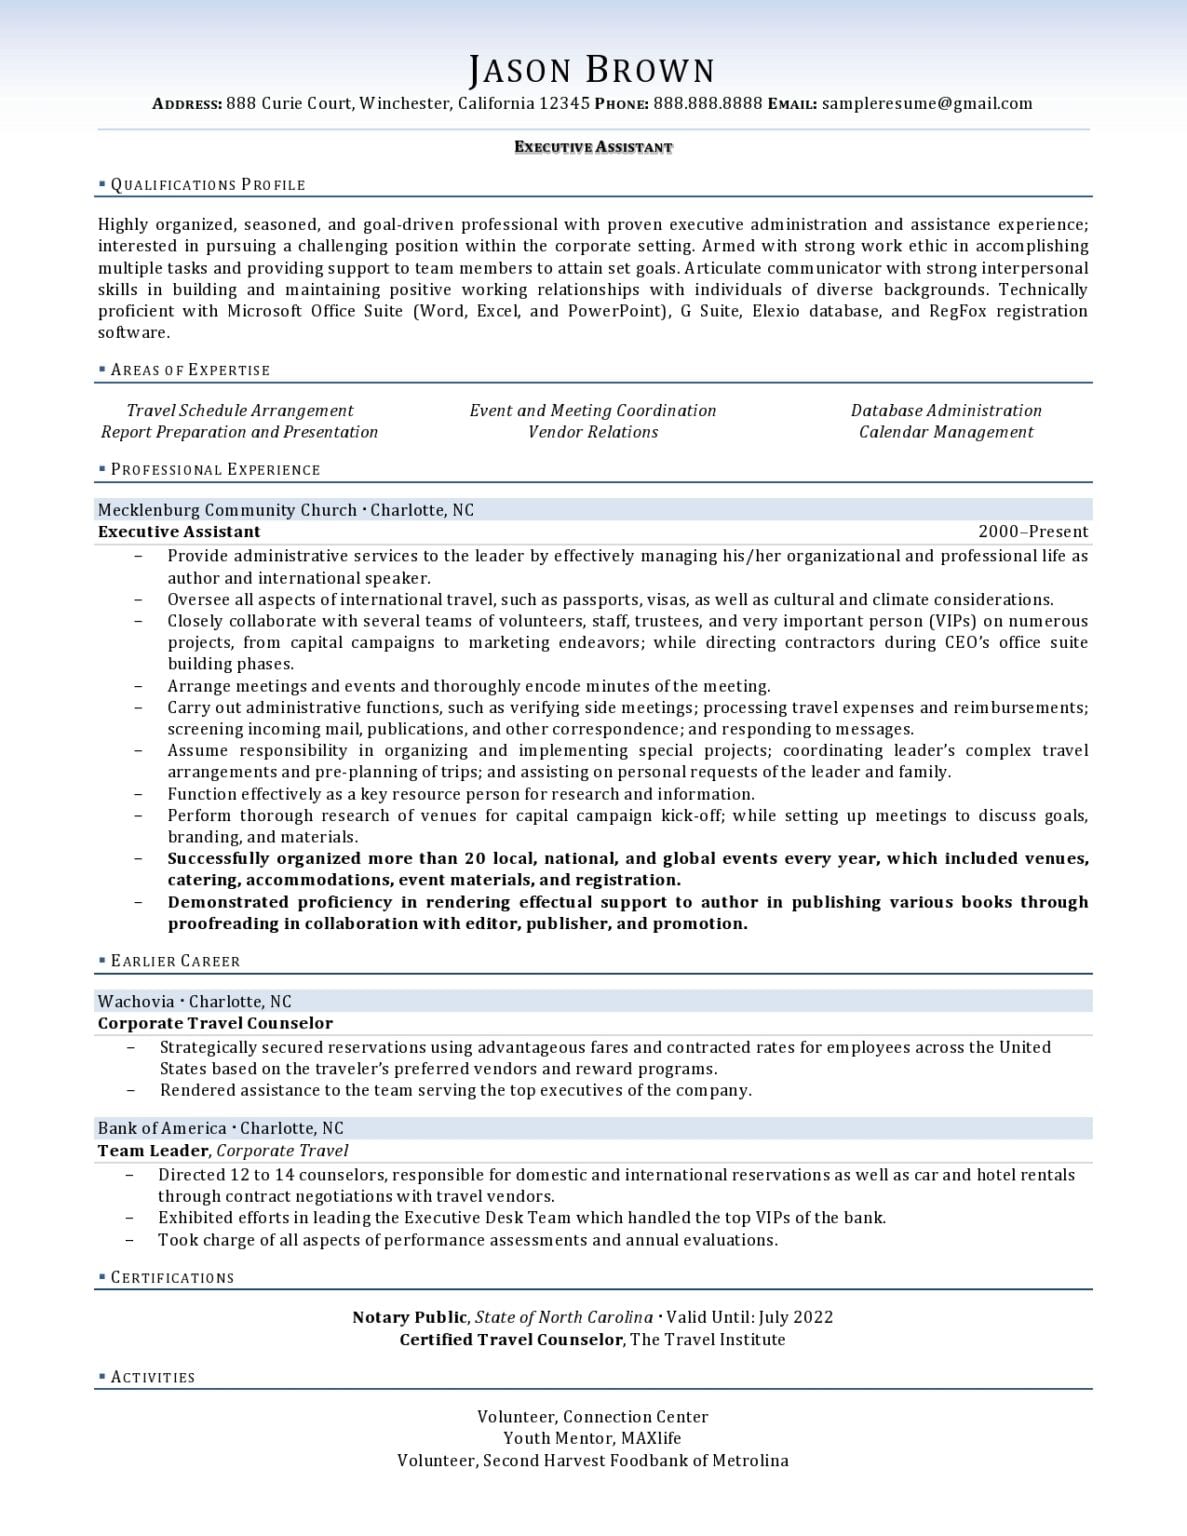 functional resume executive assistant